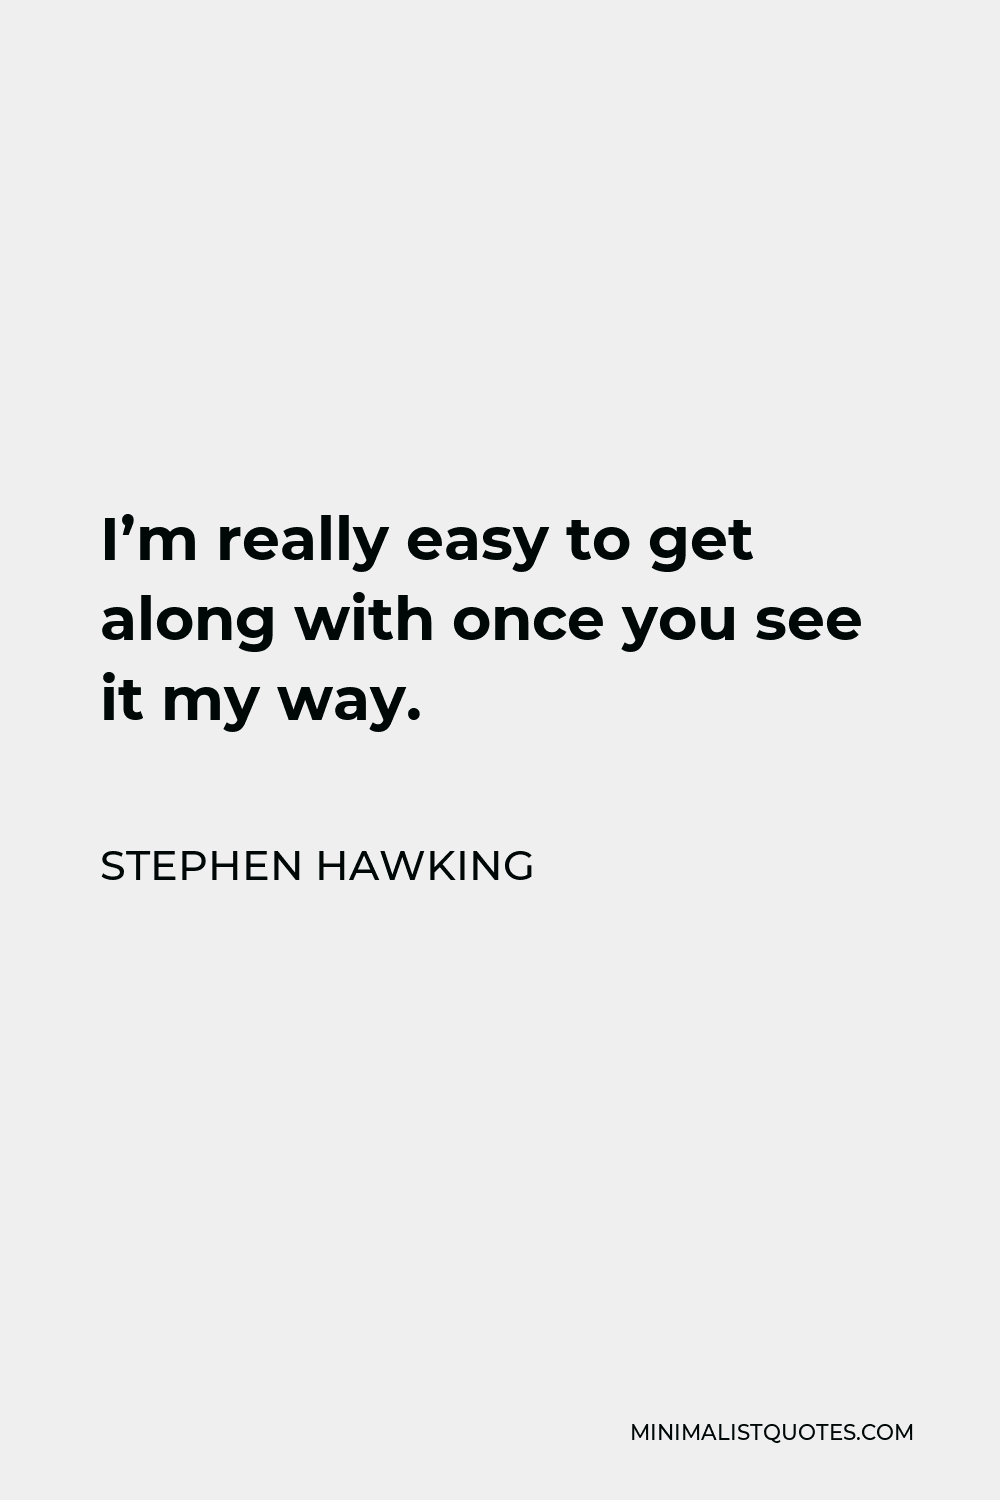 Stephen Hawking Quote - I’m really easy to get along with once you see it my way.